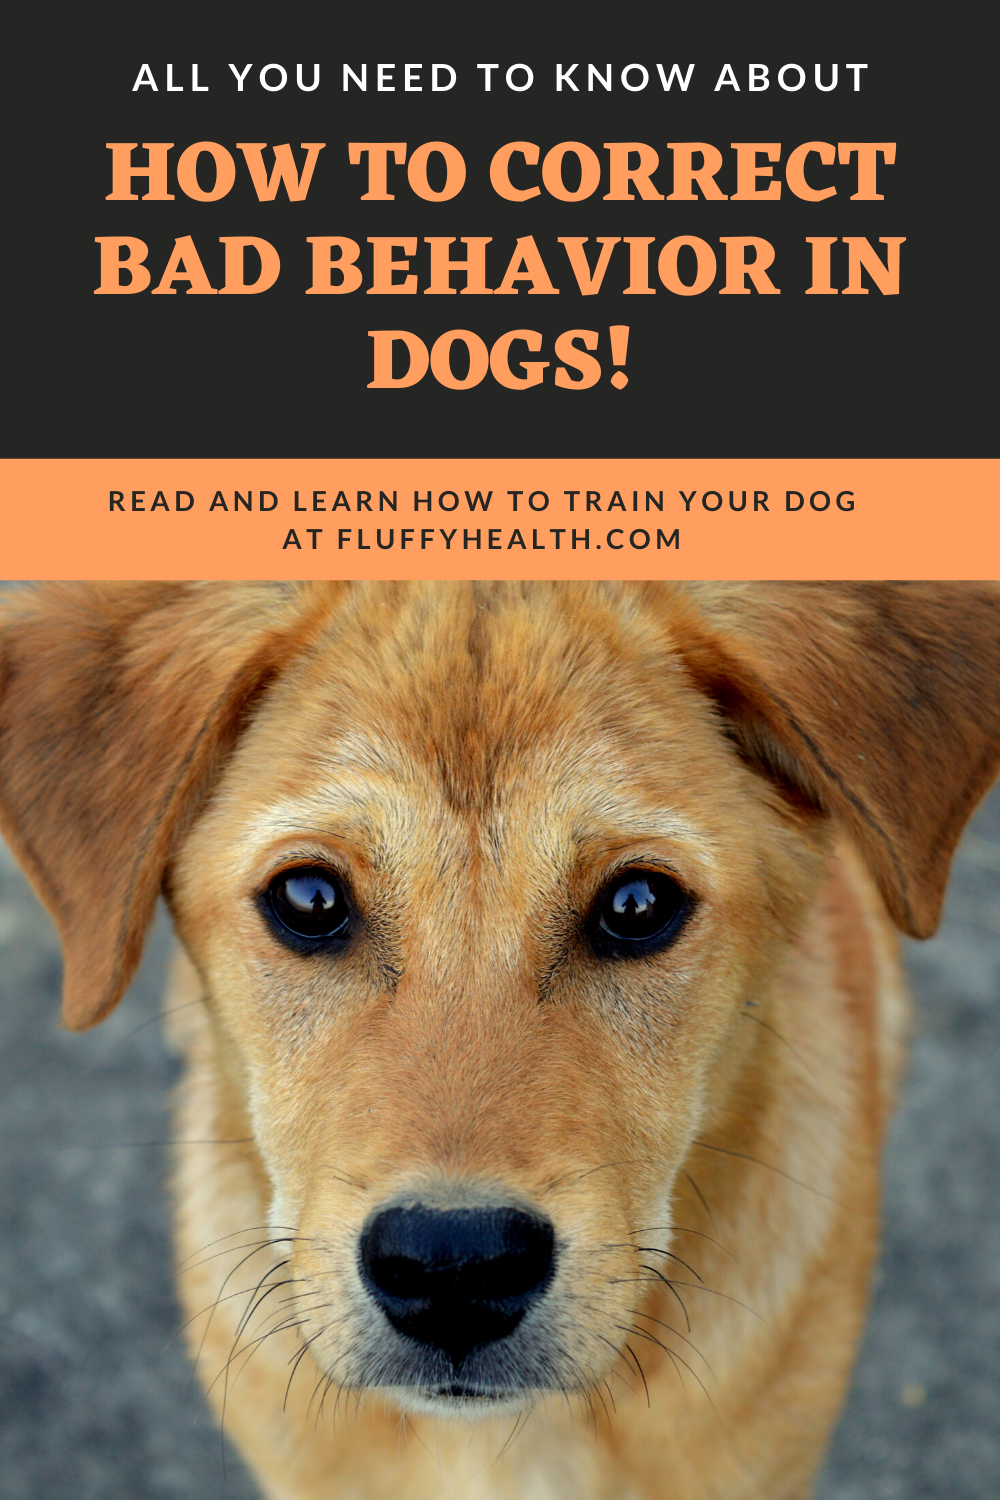 How-To-Correct-Bad-Behavior-In-Dogs